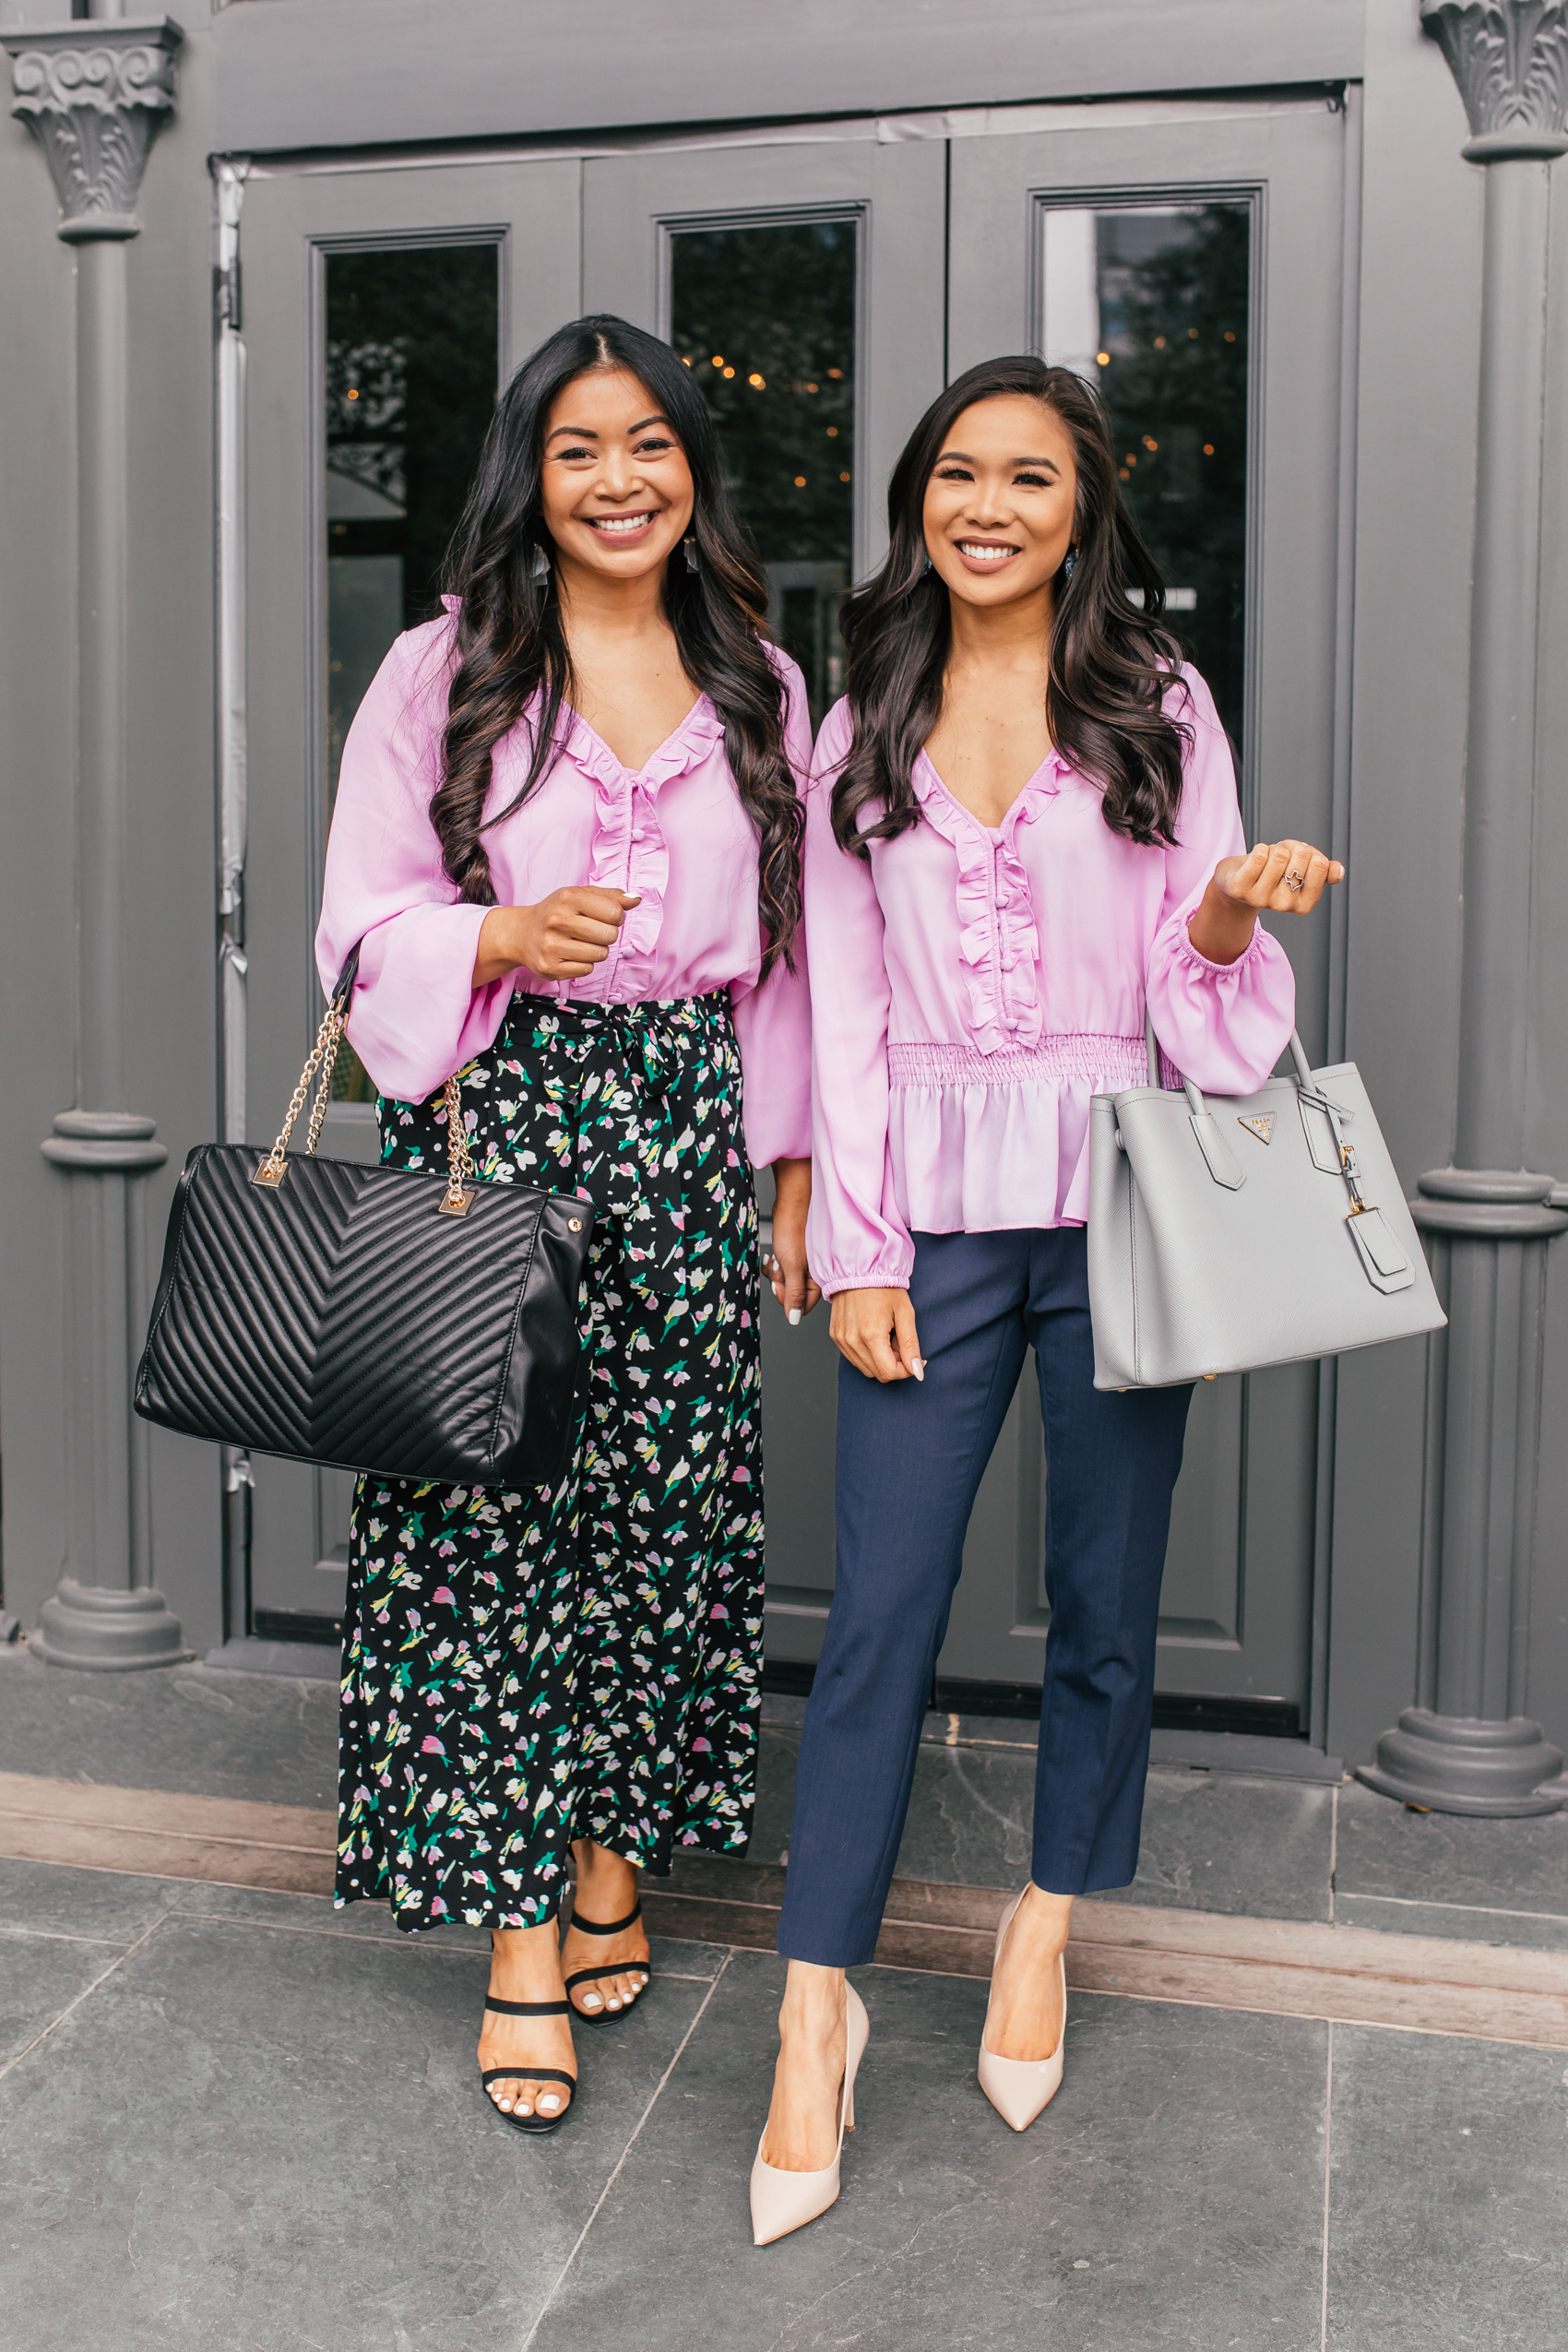 Roselyn and Hoang-Kim style the Roselyn lavender top two ways